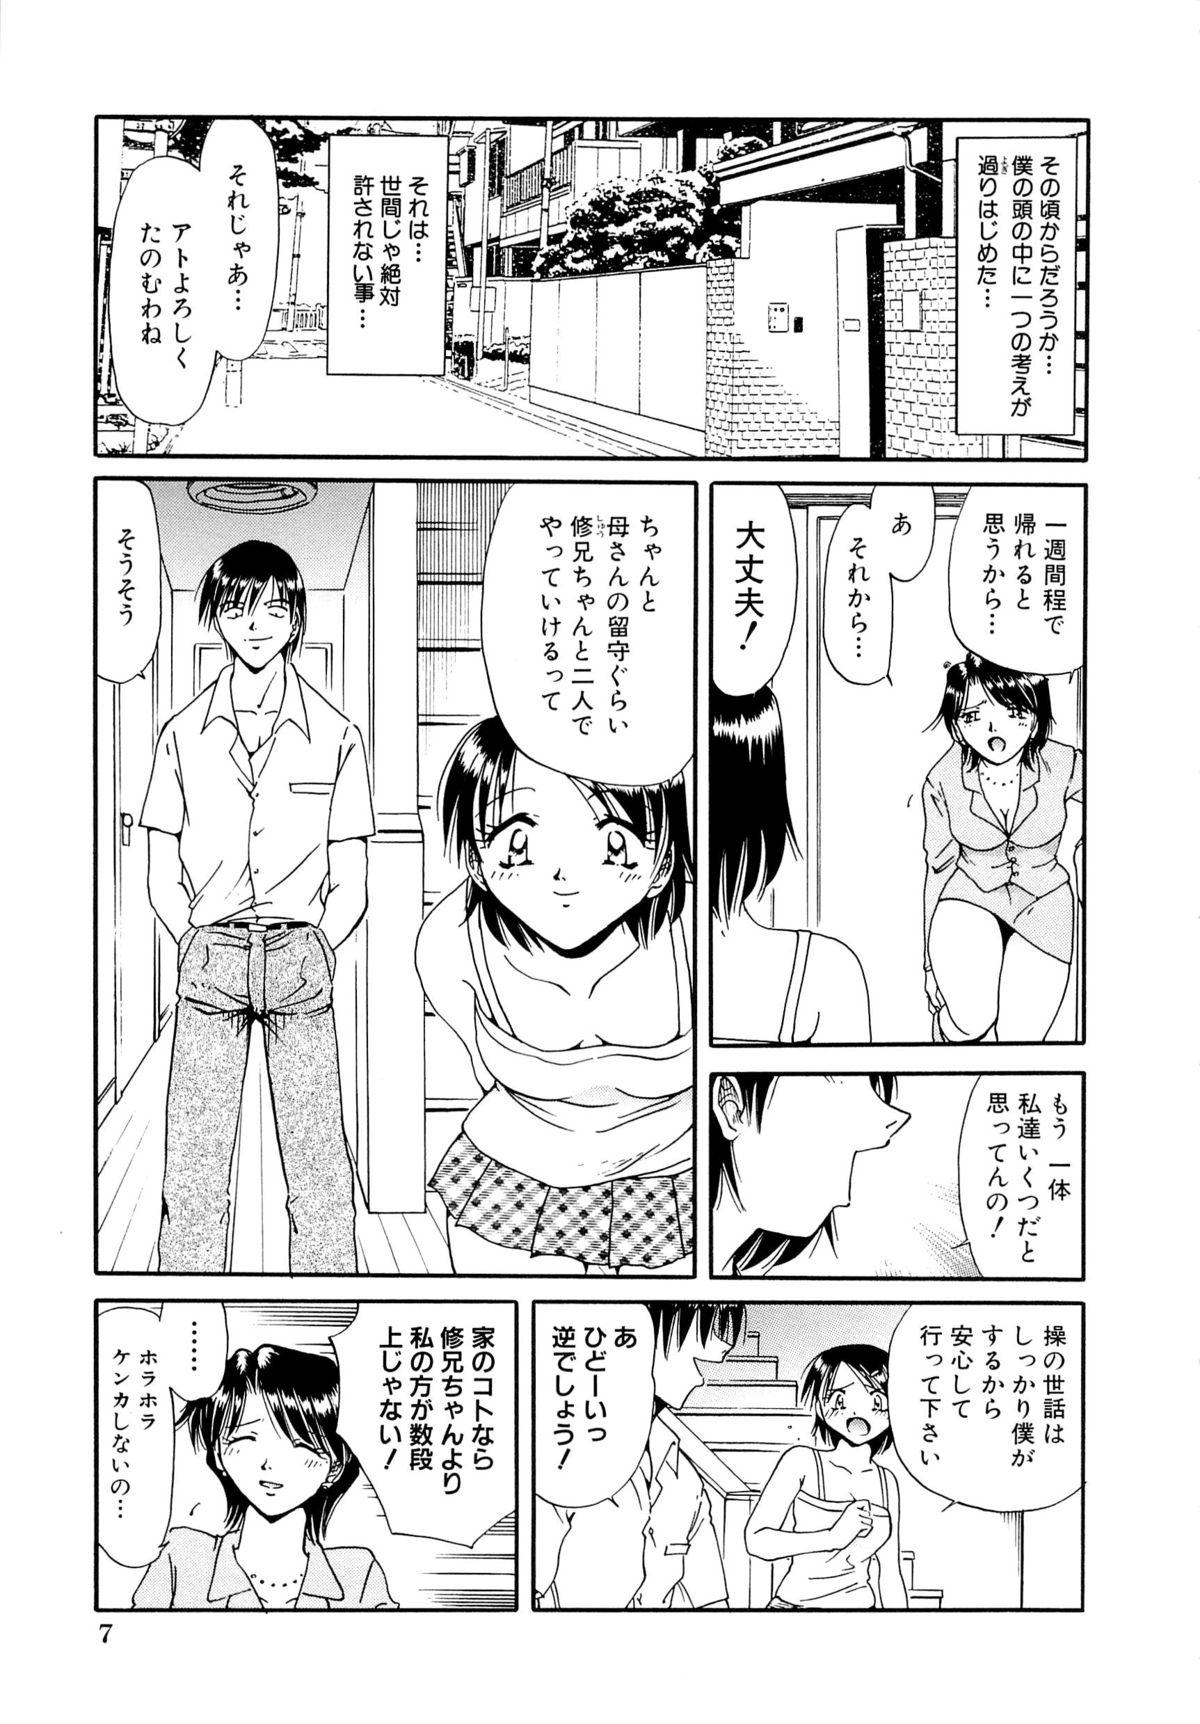 Topless Gokuchuu Soukan - Have Sexual Intercourse In Jail Sensual - Page 10